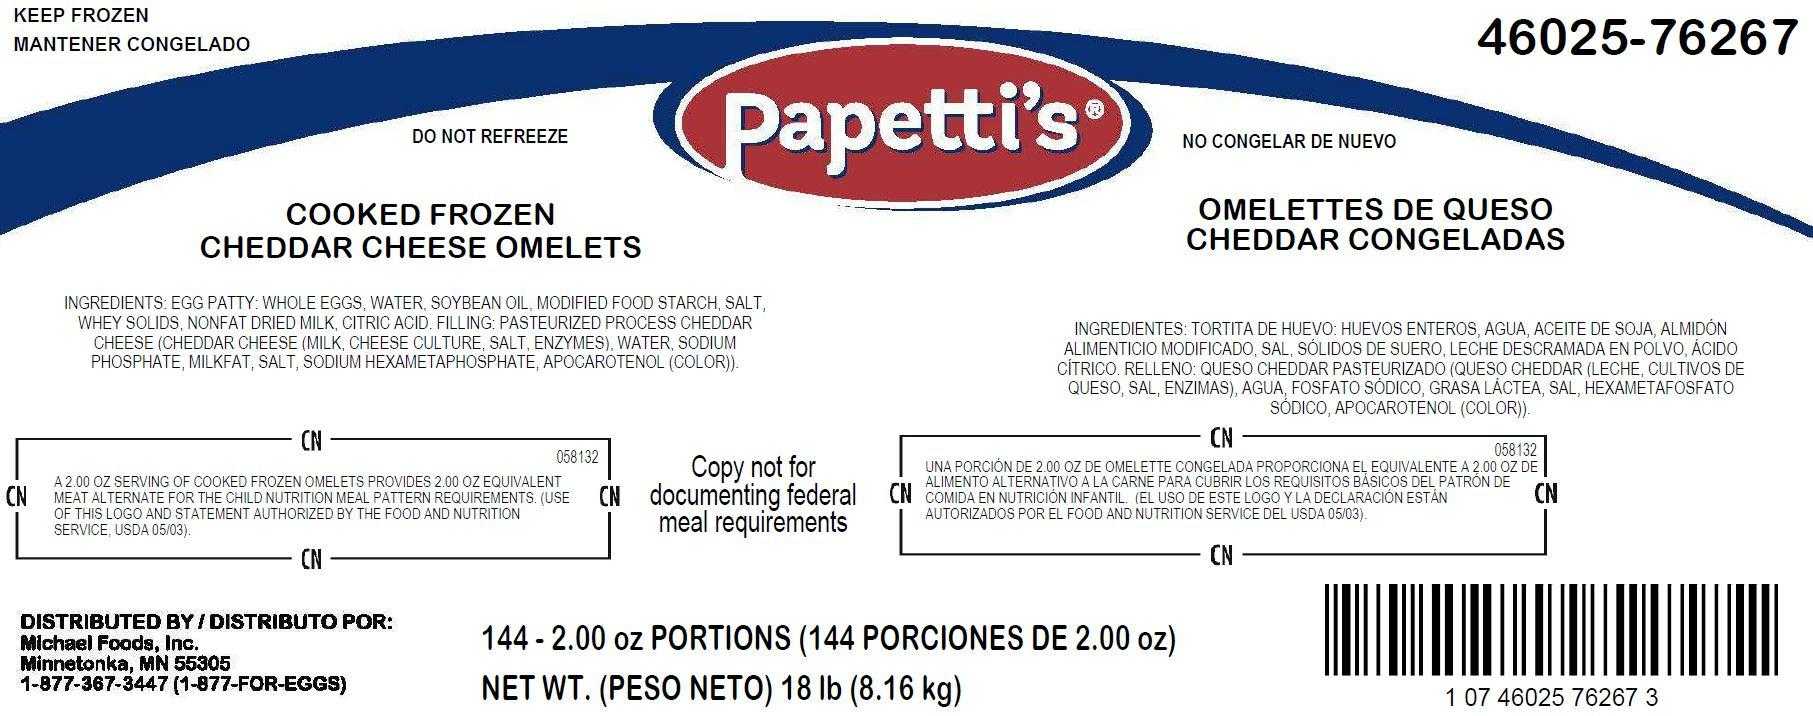 Papetti’s® Fully-Cooked 5″ x 2.25″ Singlefold Omelet filled with Cheddar Cheese, CN, 144/2.0 oz CN Labeled PDF